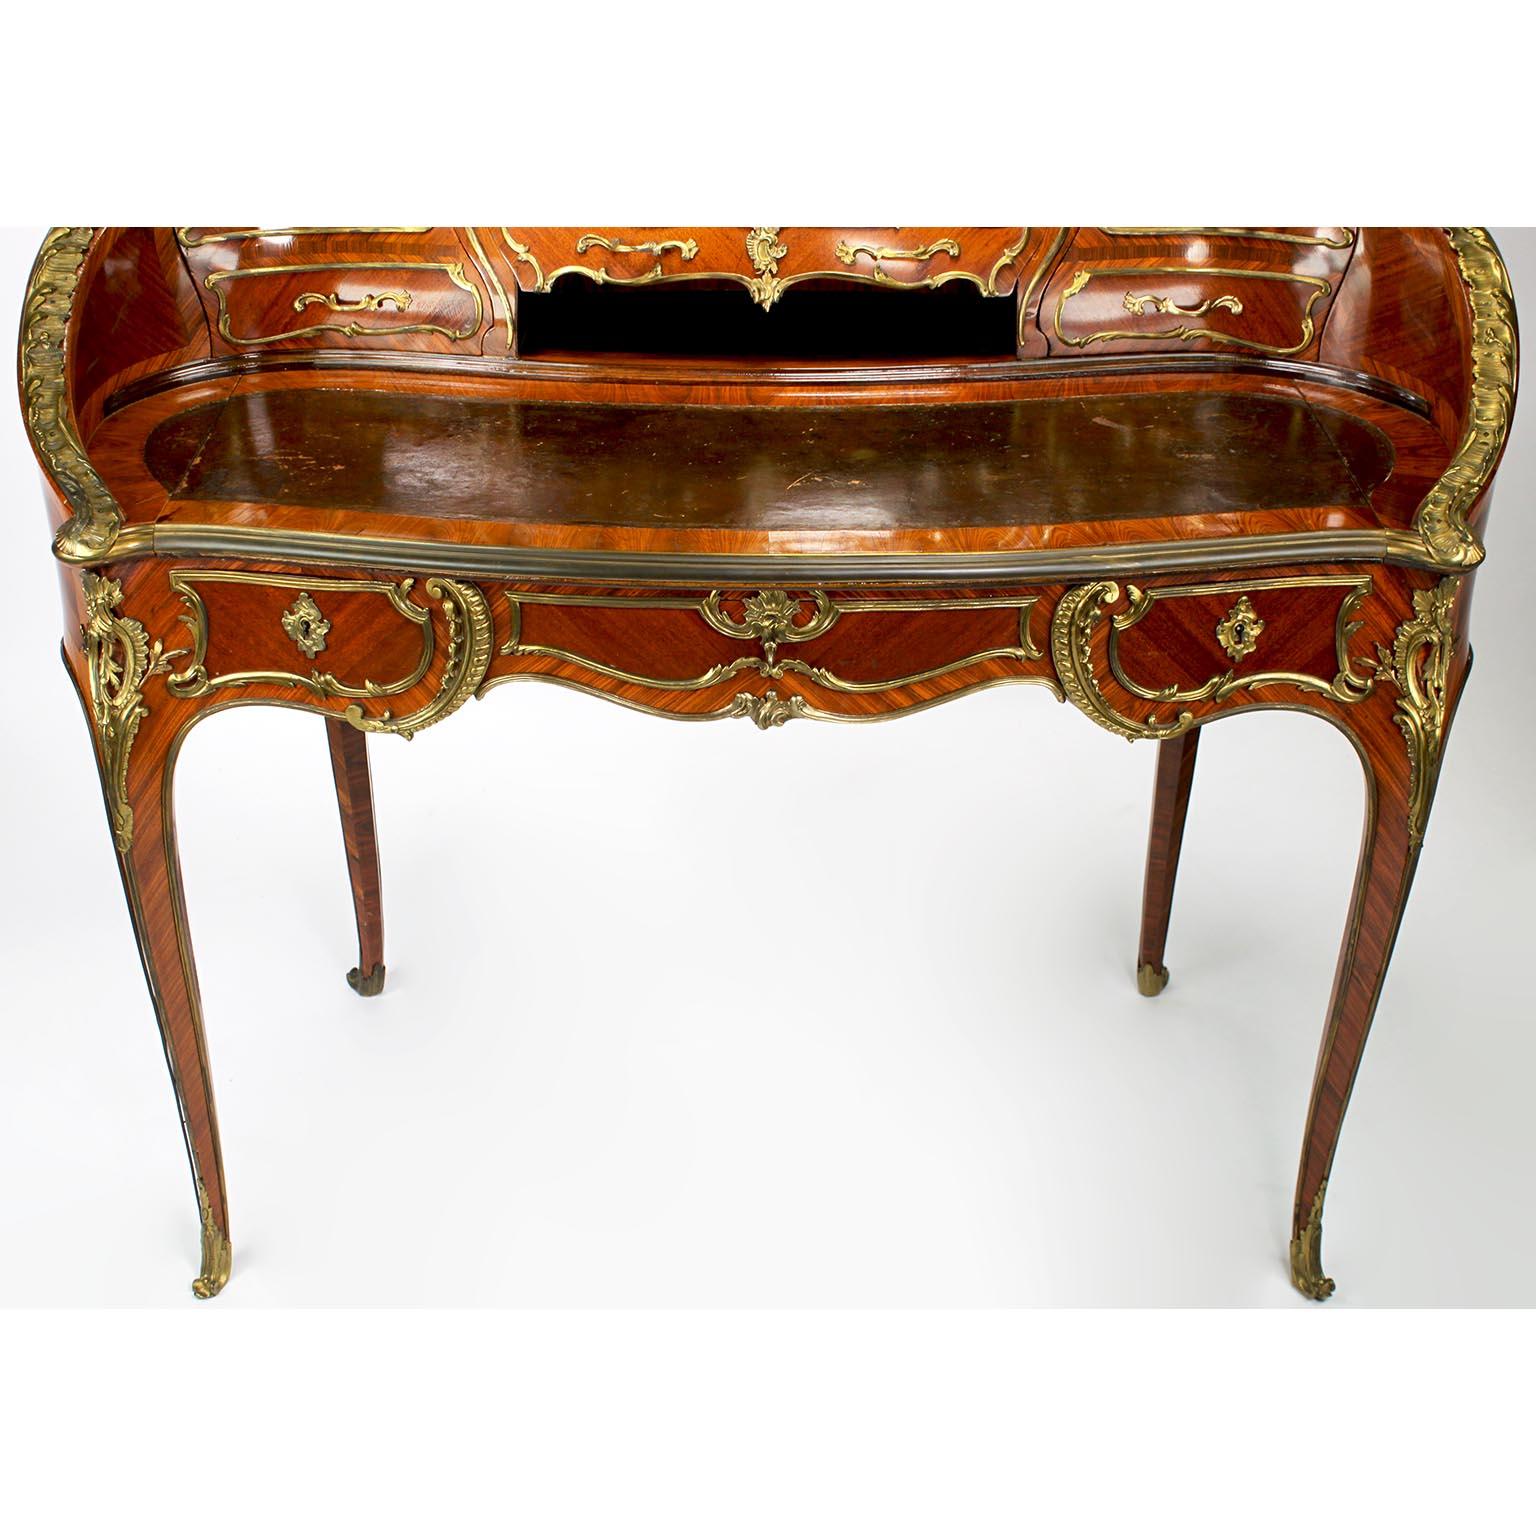 French 19th Century Louis XV Style Ormolu-Mounted Lady's Secretary Desk, Millet For Sale 3